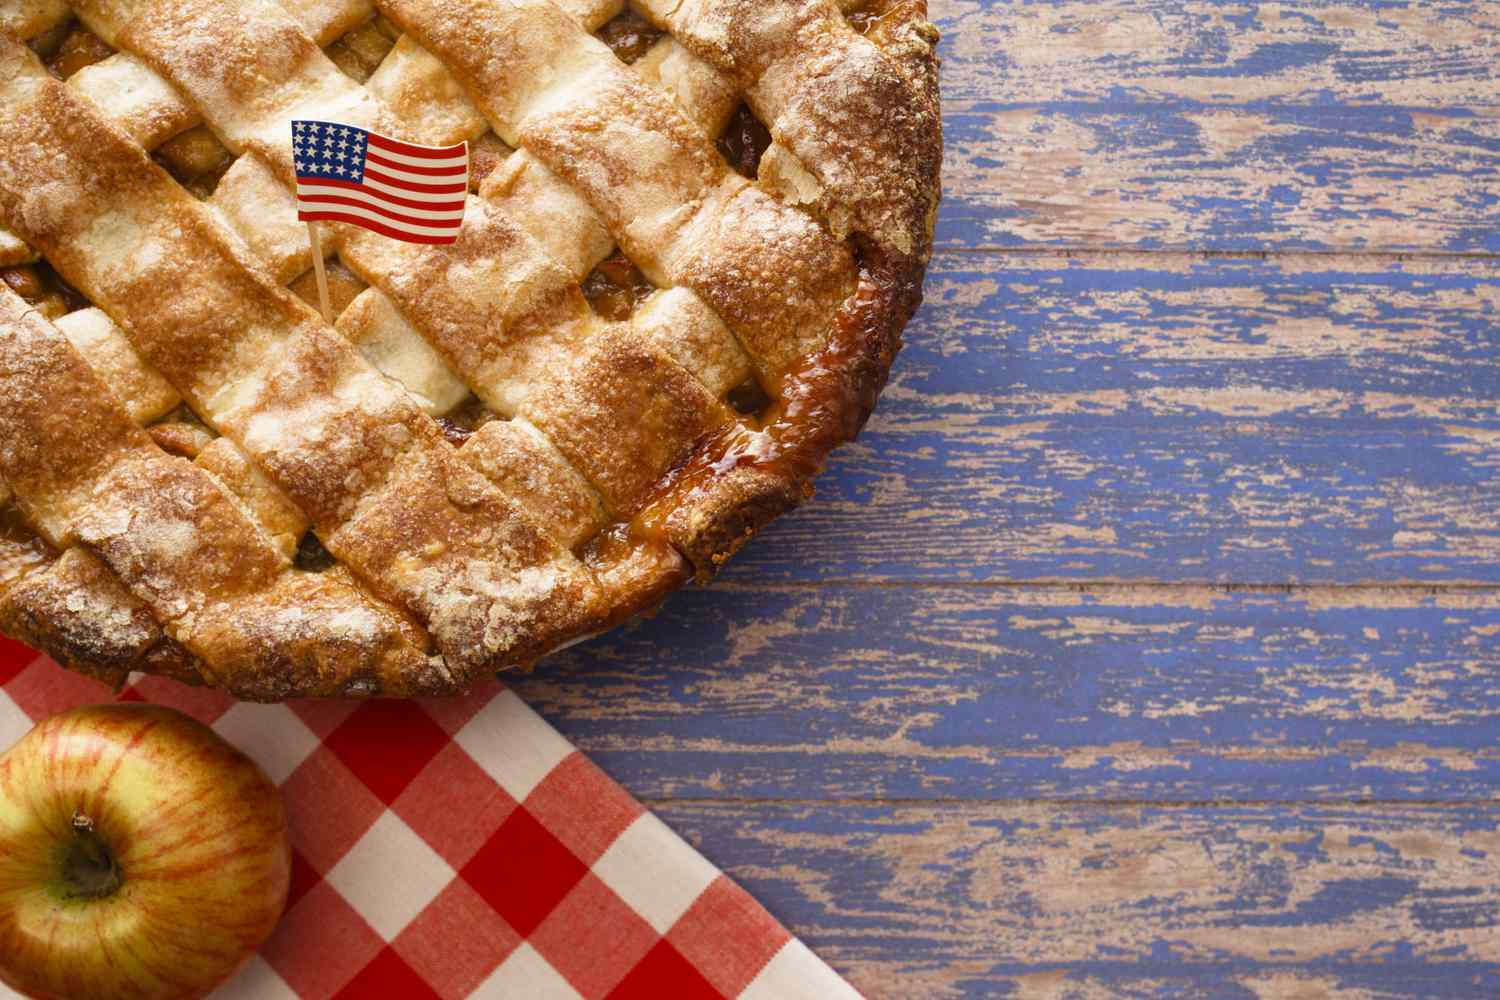 Apple pie is often considered an iconic and quintessential American dessert, deeply rooted in cultural history